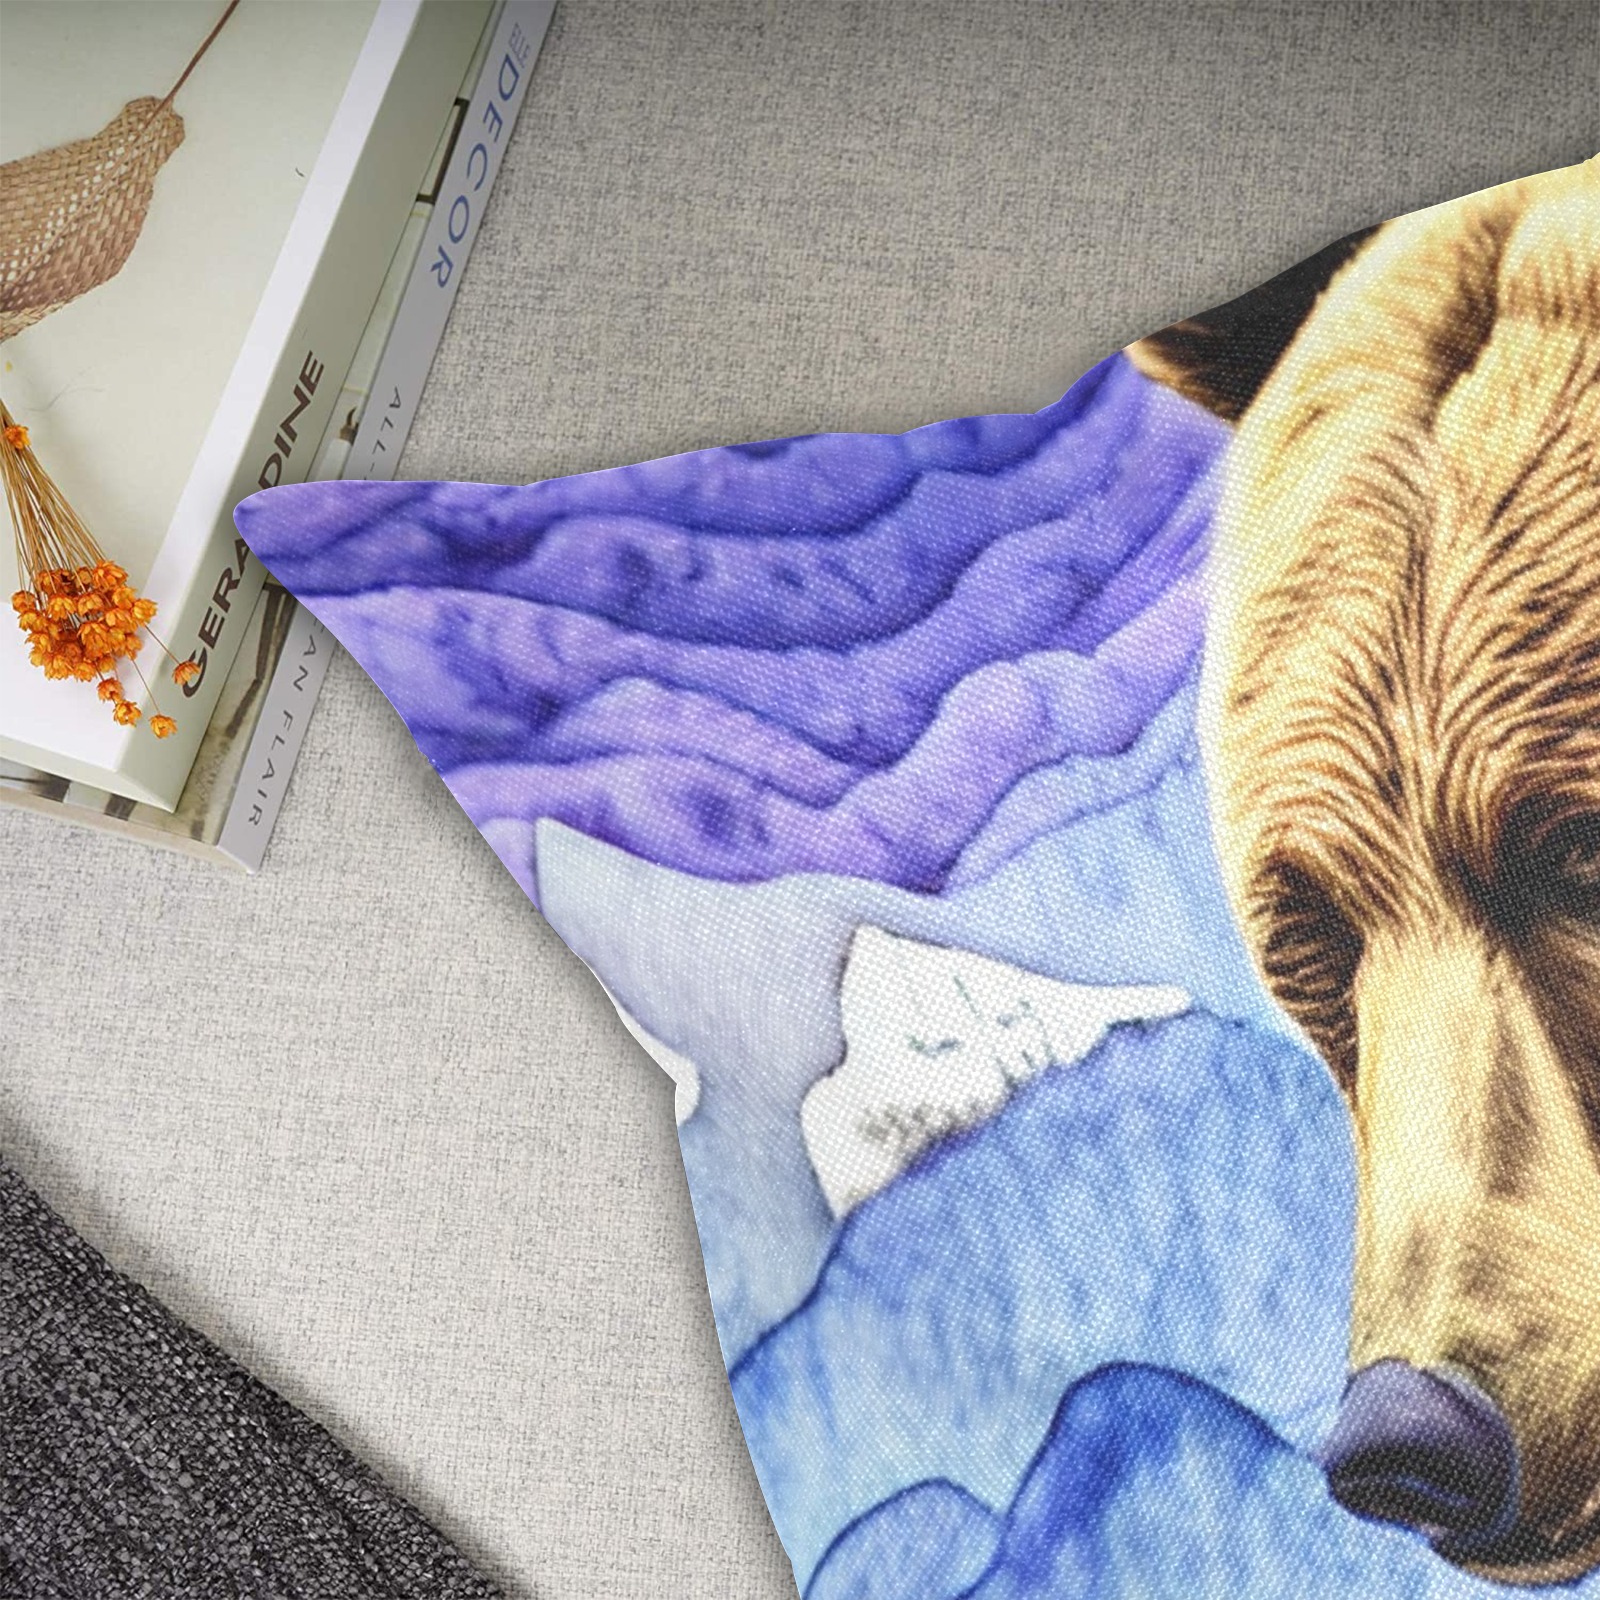 Boho Bear Simulated Quilt Artwork Linen Zippered Pillowcase 18"x18"(Two Sides&Pack of 2)